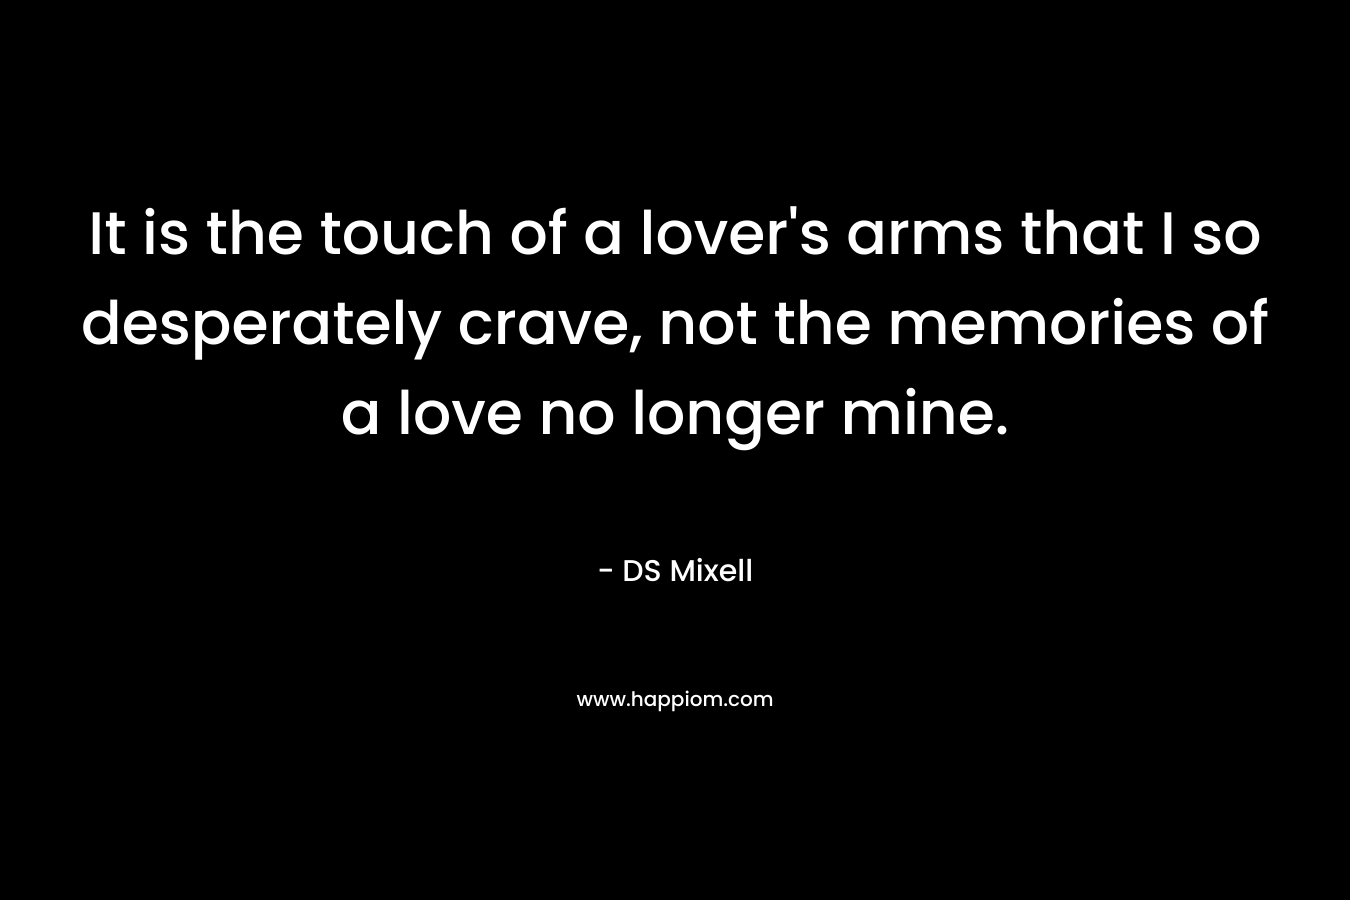 It is the touch of a lover's arms that I so desperately crave, not the memories of a love no longer mine.